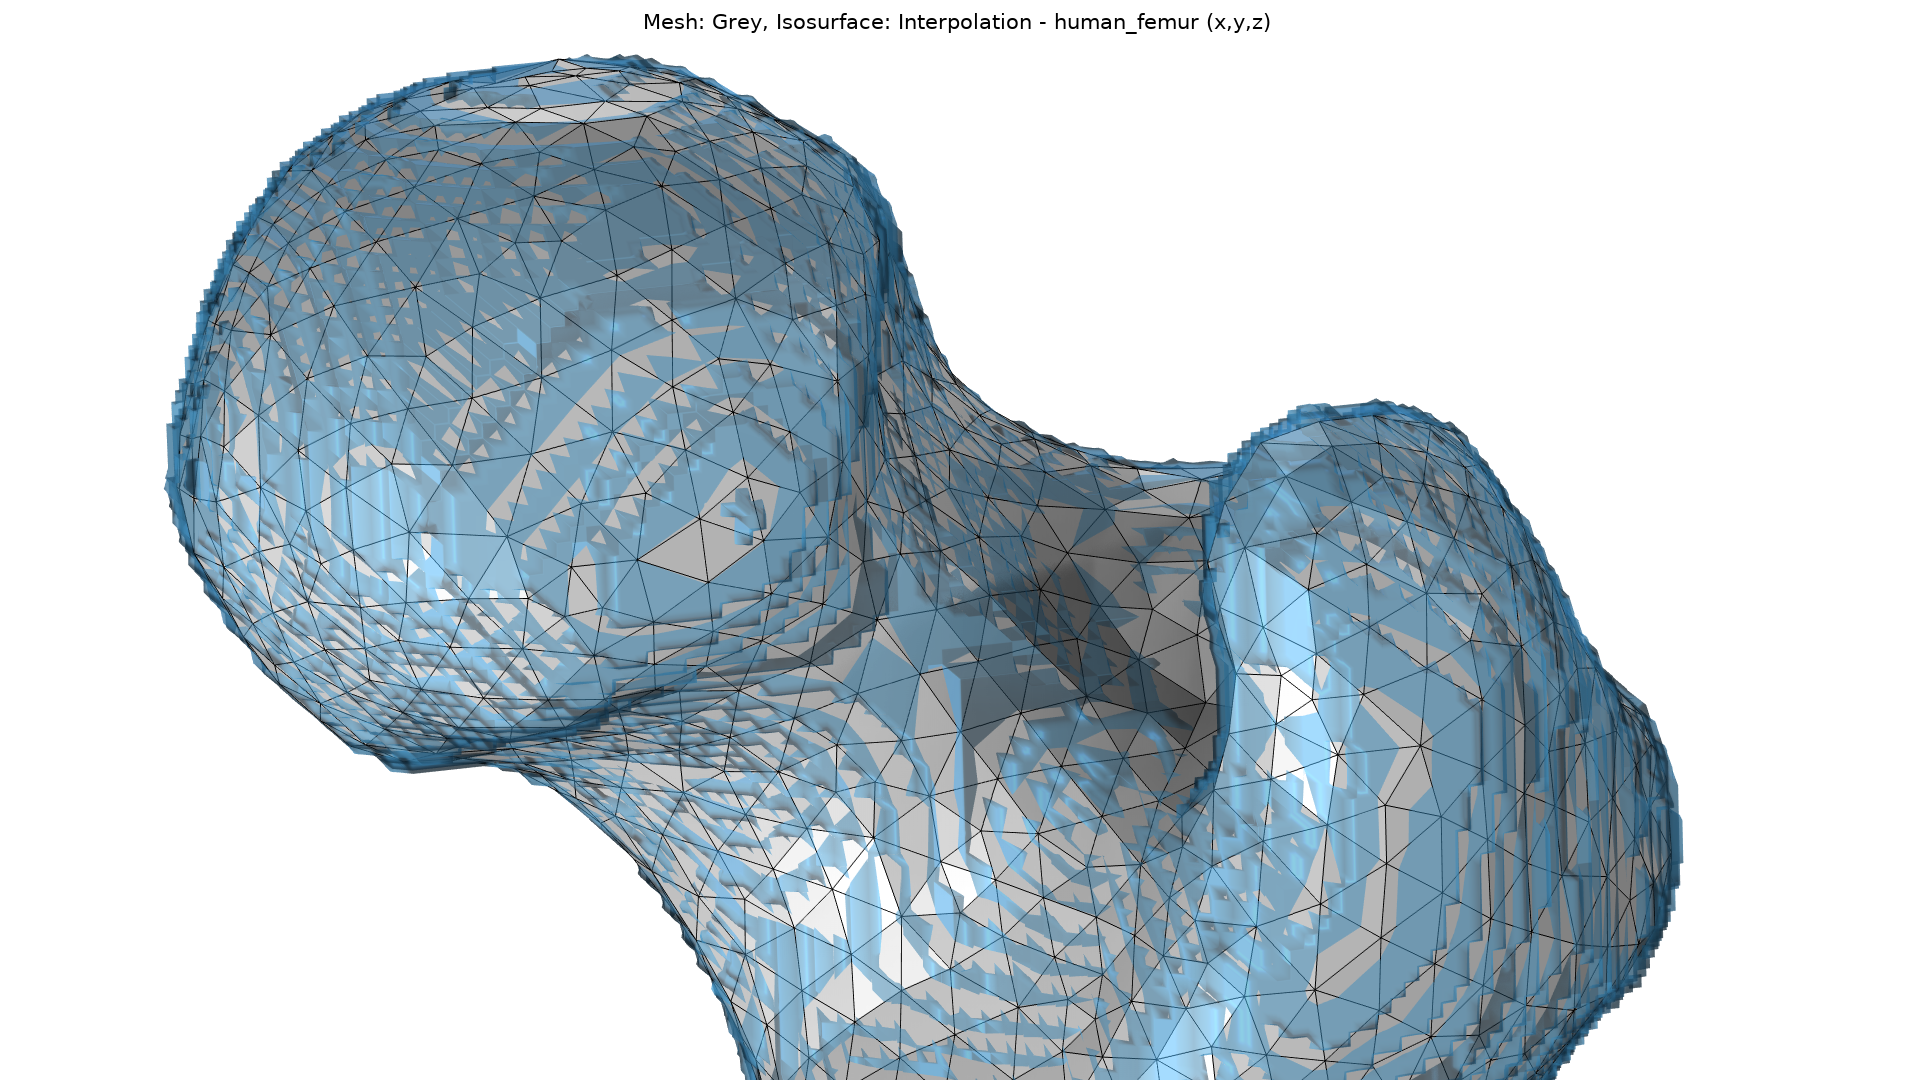 A close-up of the top of a femur. Here, we can see a comparison of the generated mesh (shown in gray) and the imported data (shown in blue).